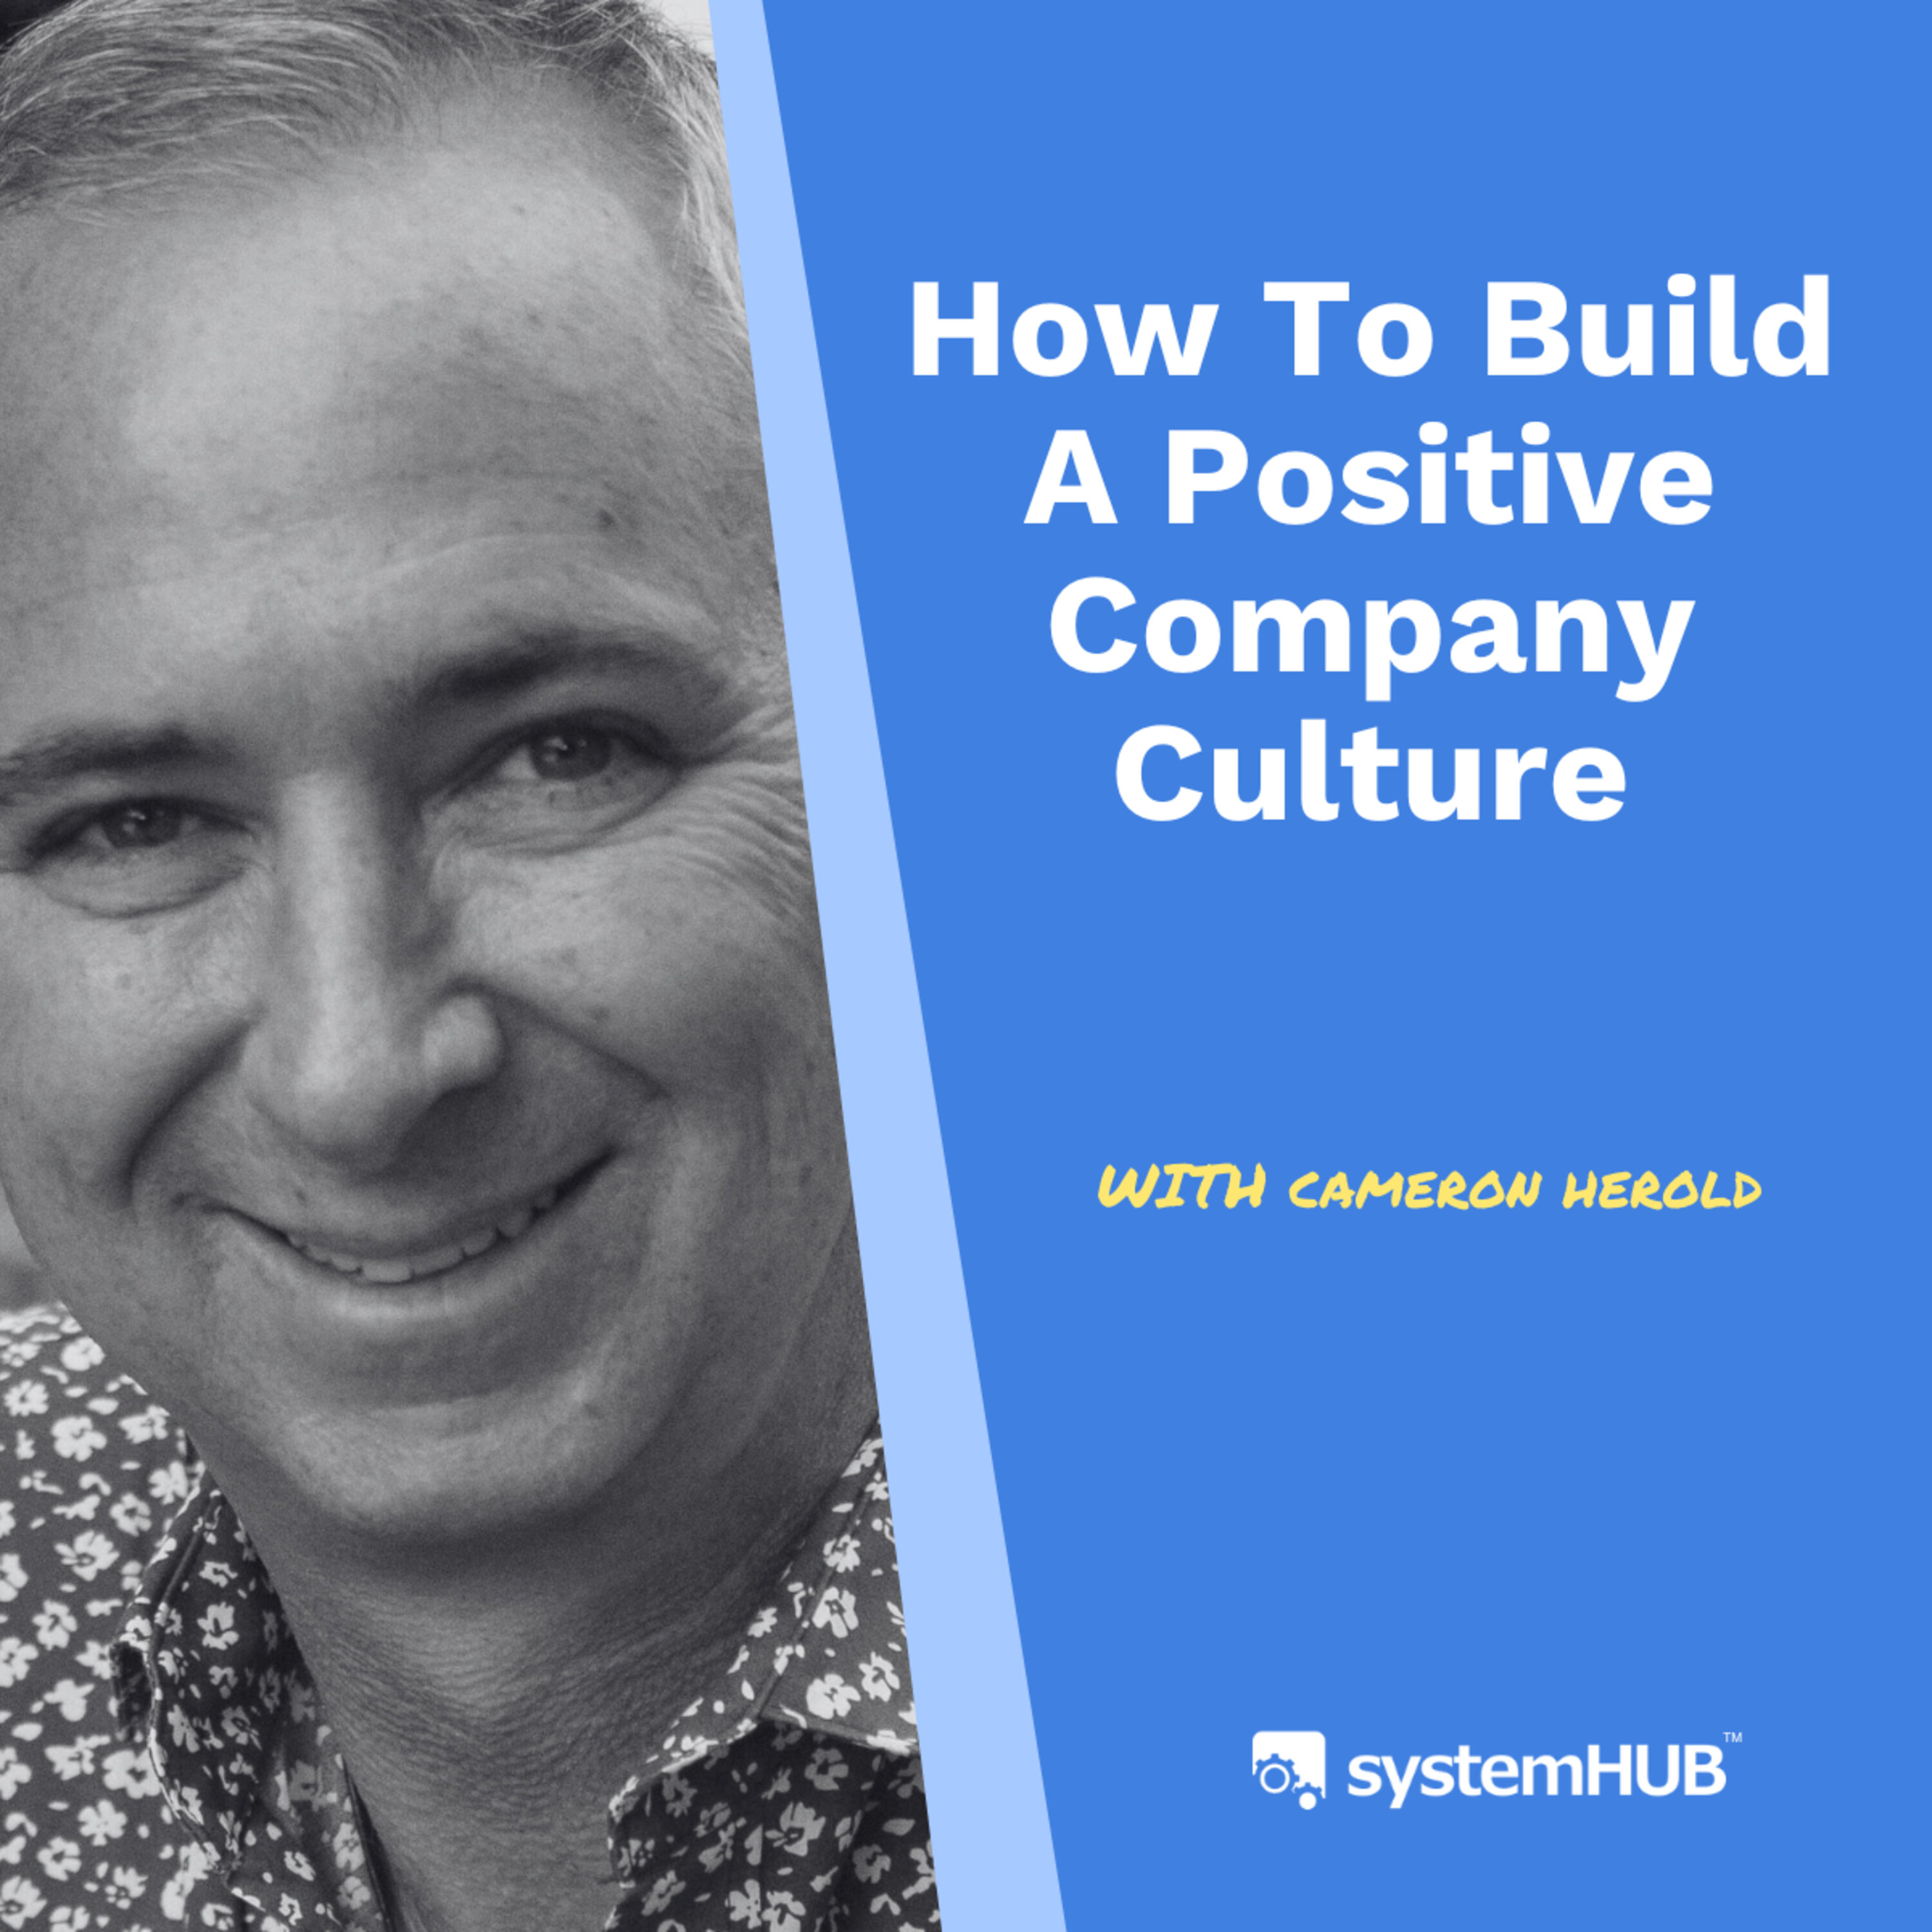 How To Build A Positive Company Culture with Cameron Herold